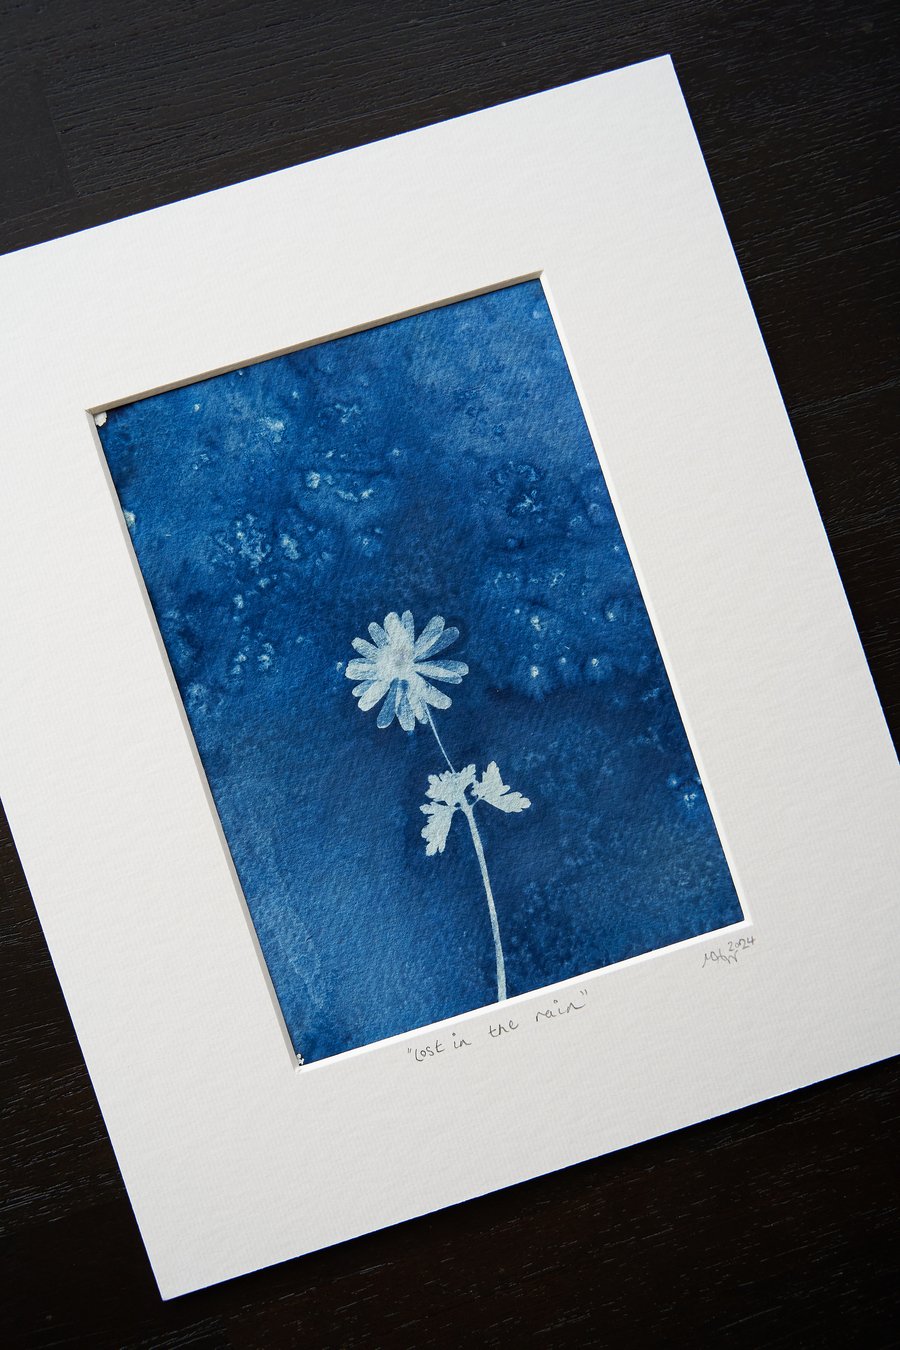 original wet cyanotype print entitled "lost in the rain”, mounted